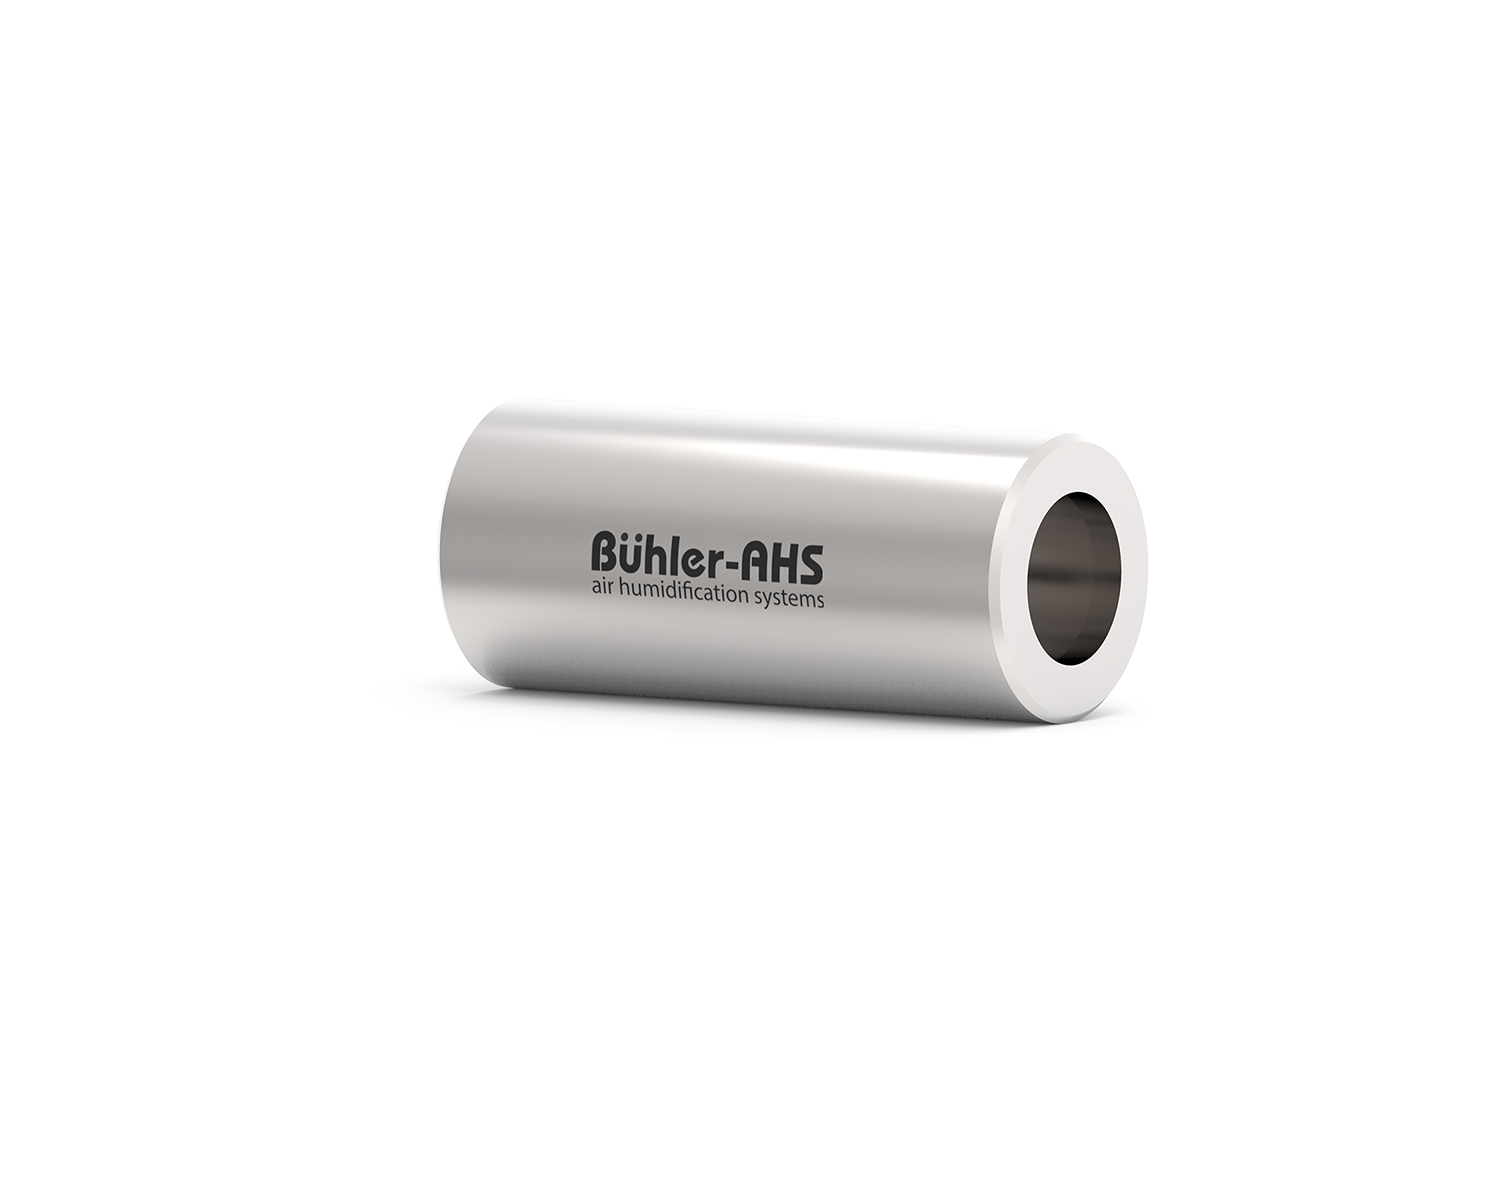 Buhler-AHS AC.F15 - ferrule for crimping of HPH04-PTFE STEEL THERMO reinforced high-pressure hose